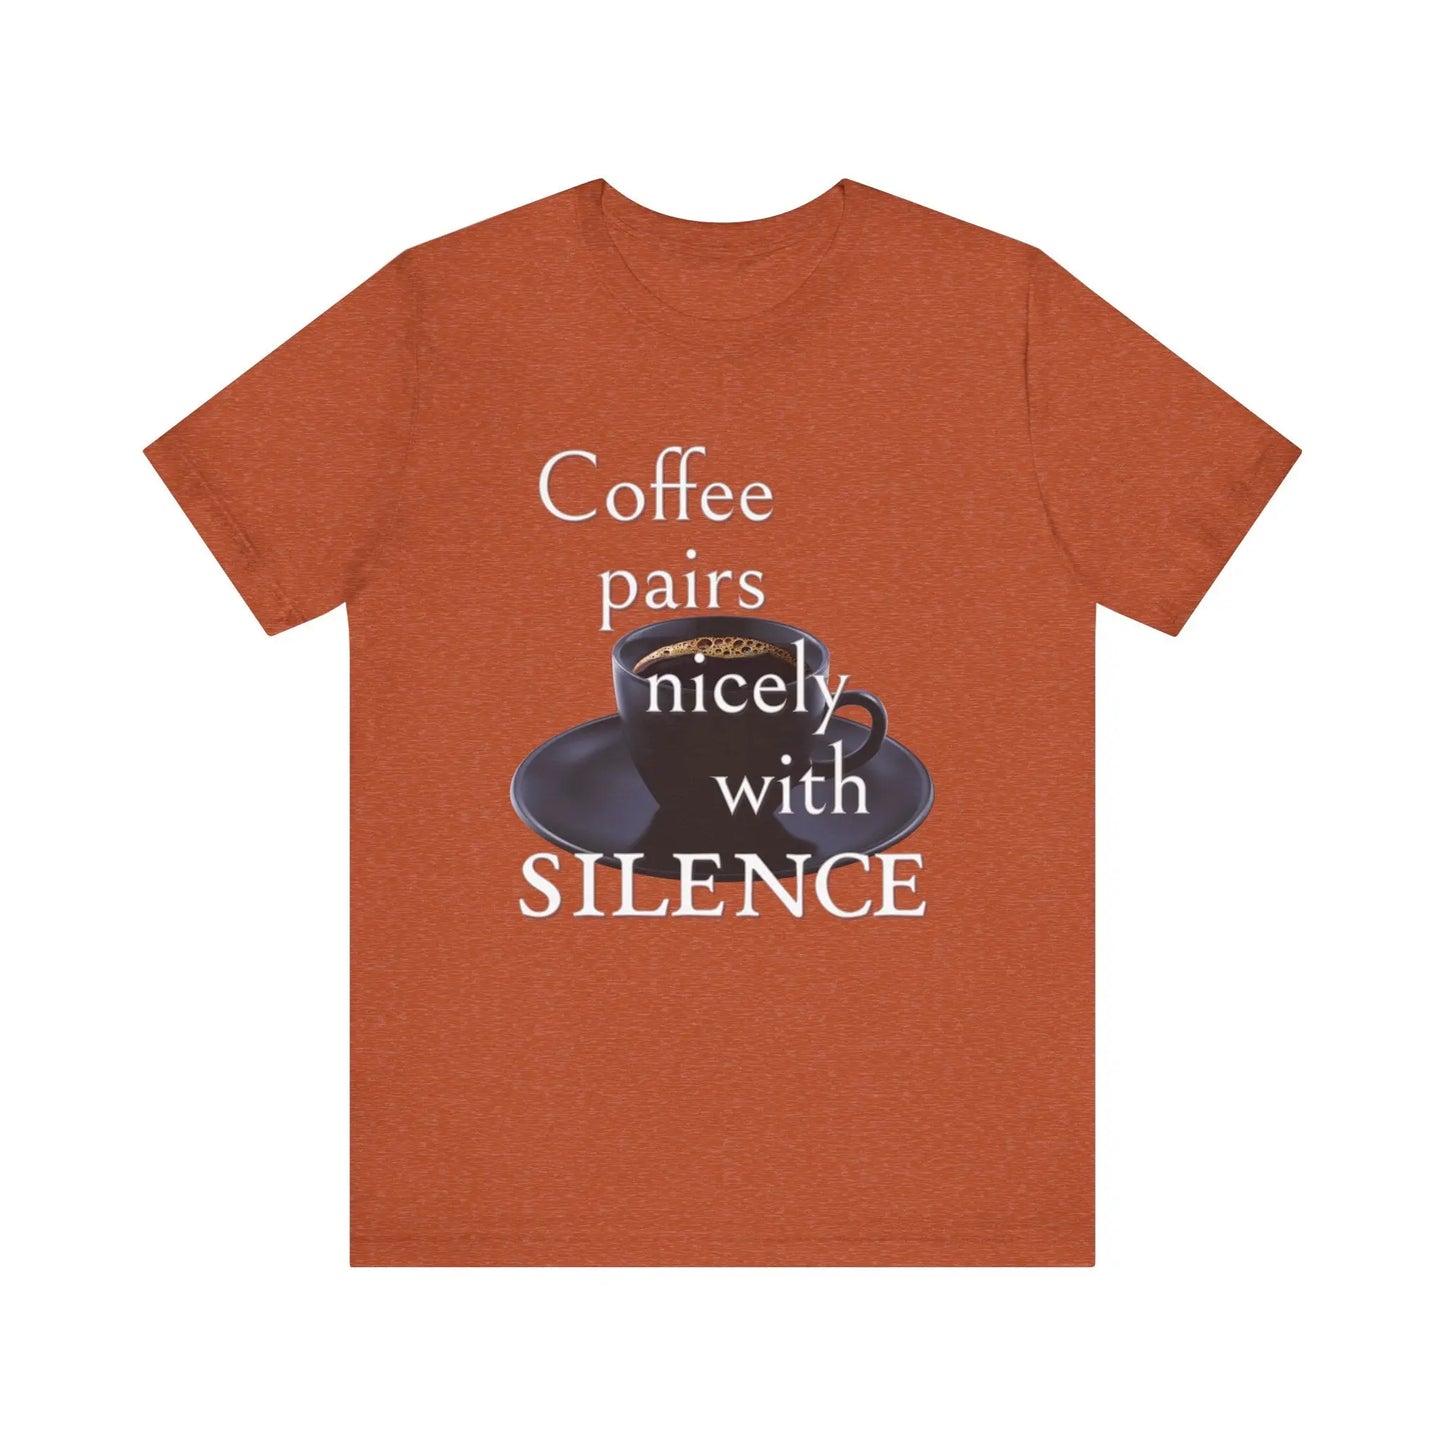 Coffee Pairs Nicely With Silence Women's Tee - Wicked Tees